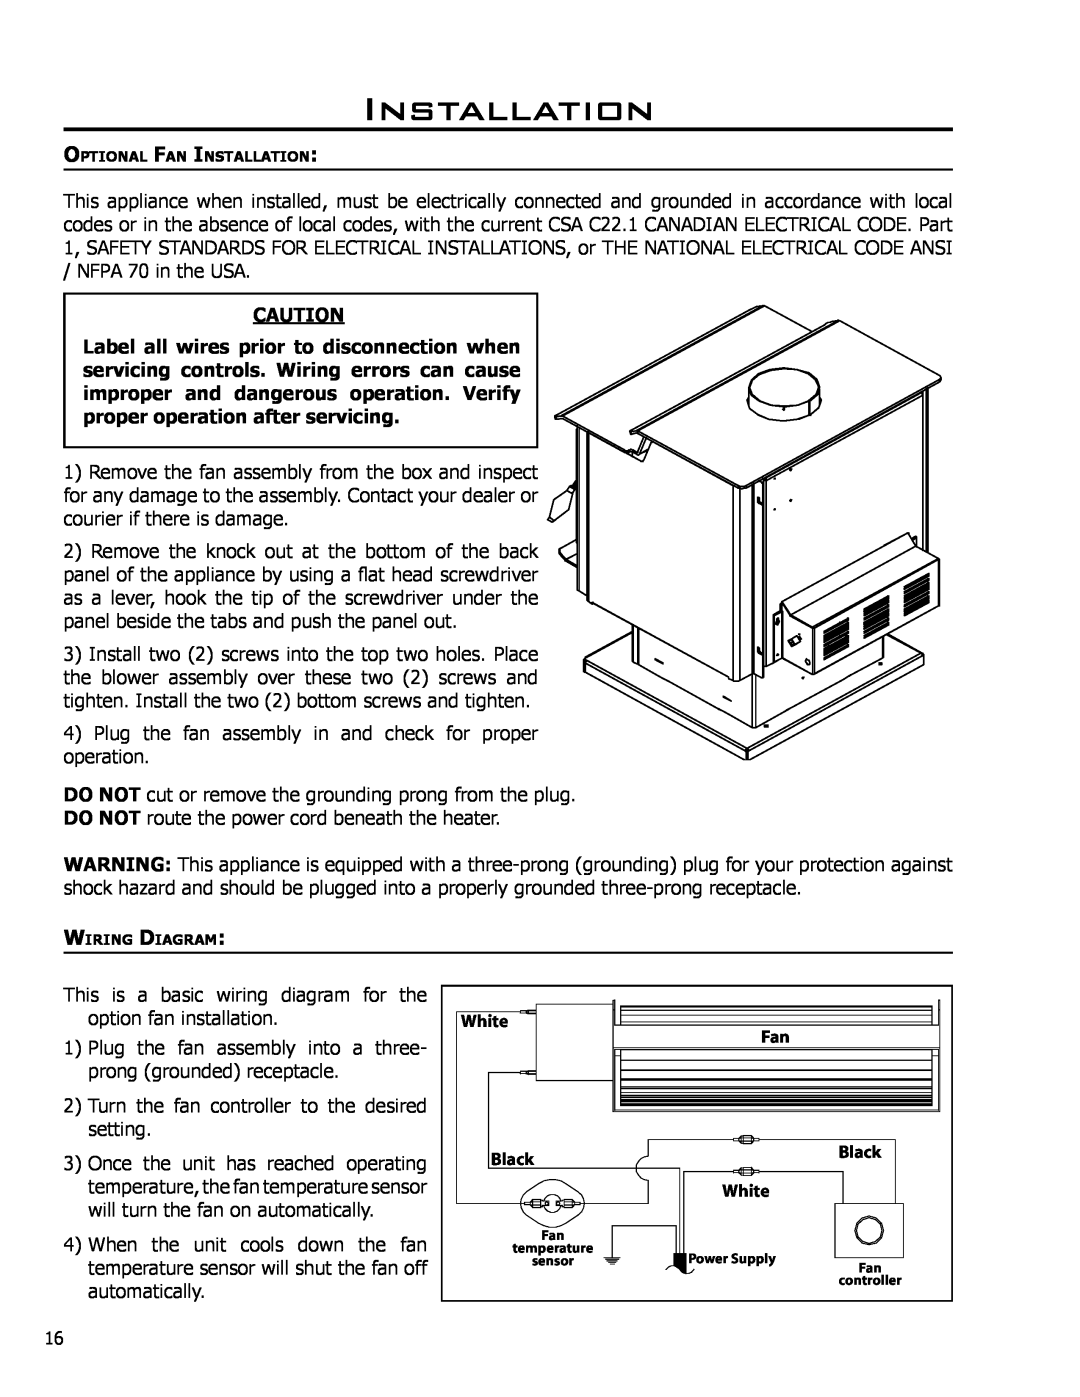 Enviro 2100 owner manual Installation, Remove the fan assembly from the box and inspect 